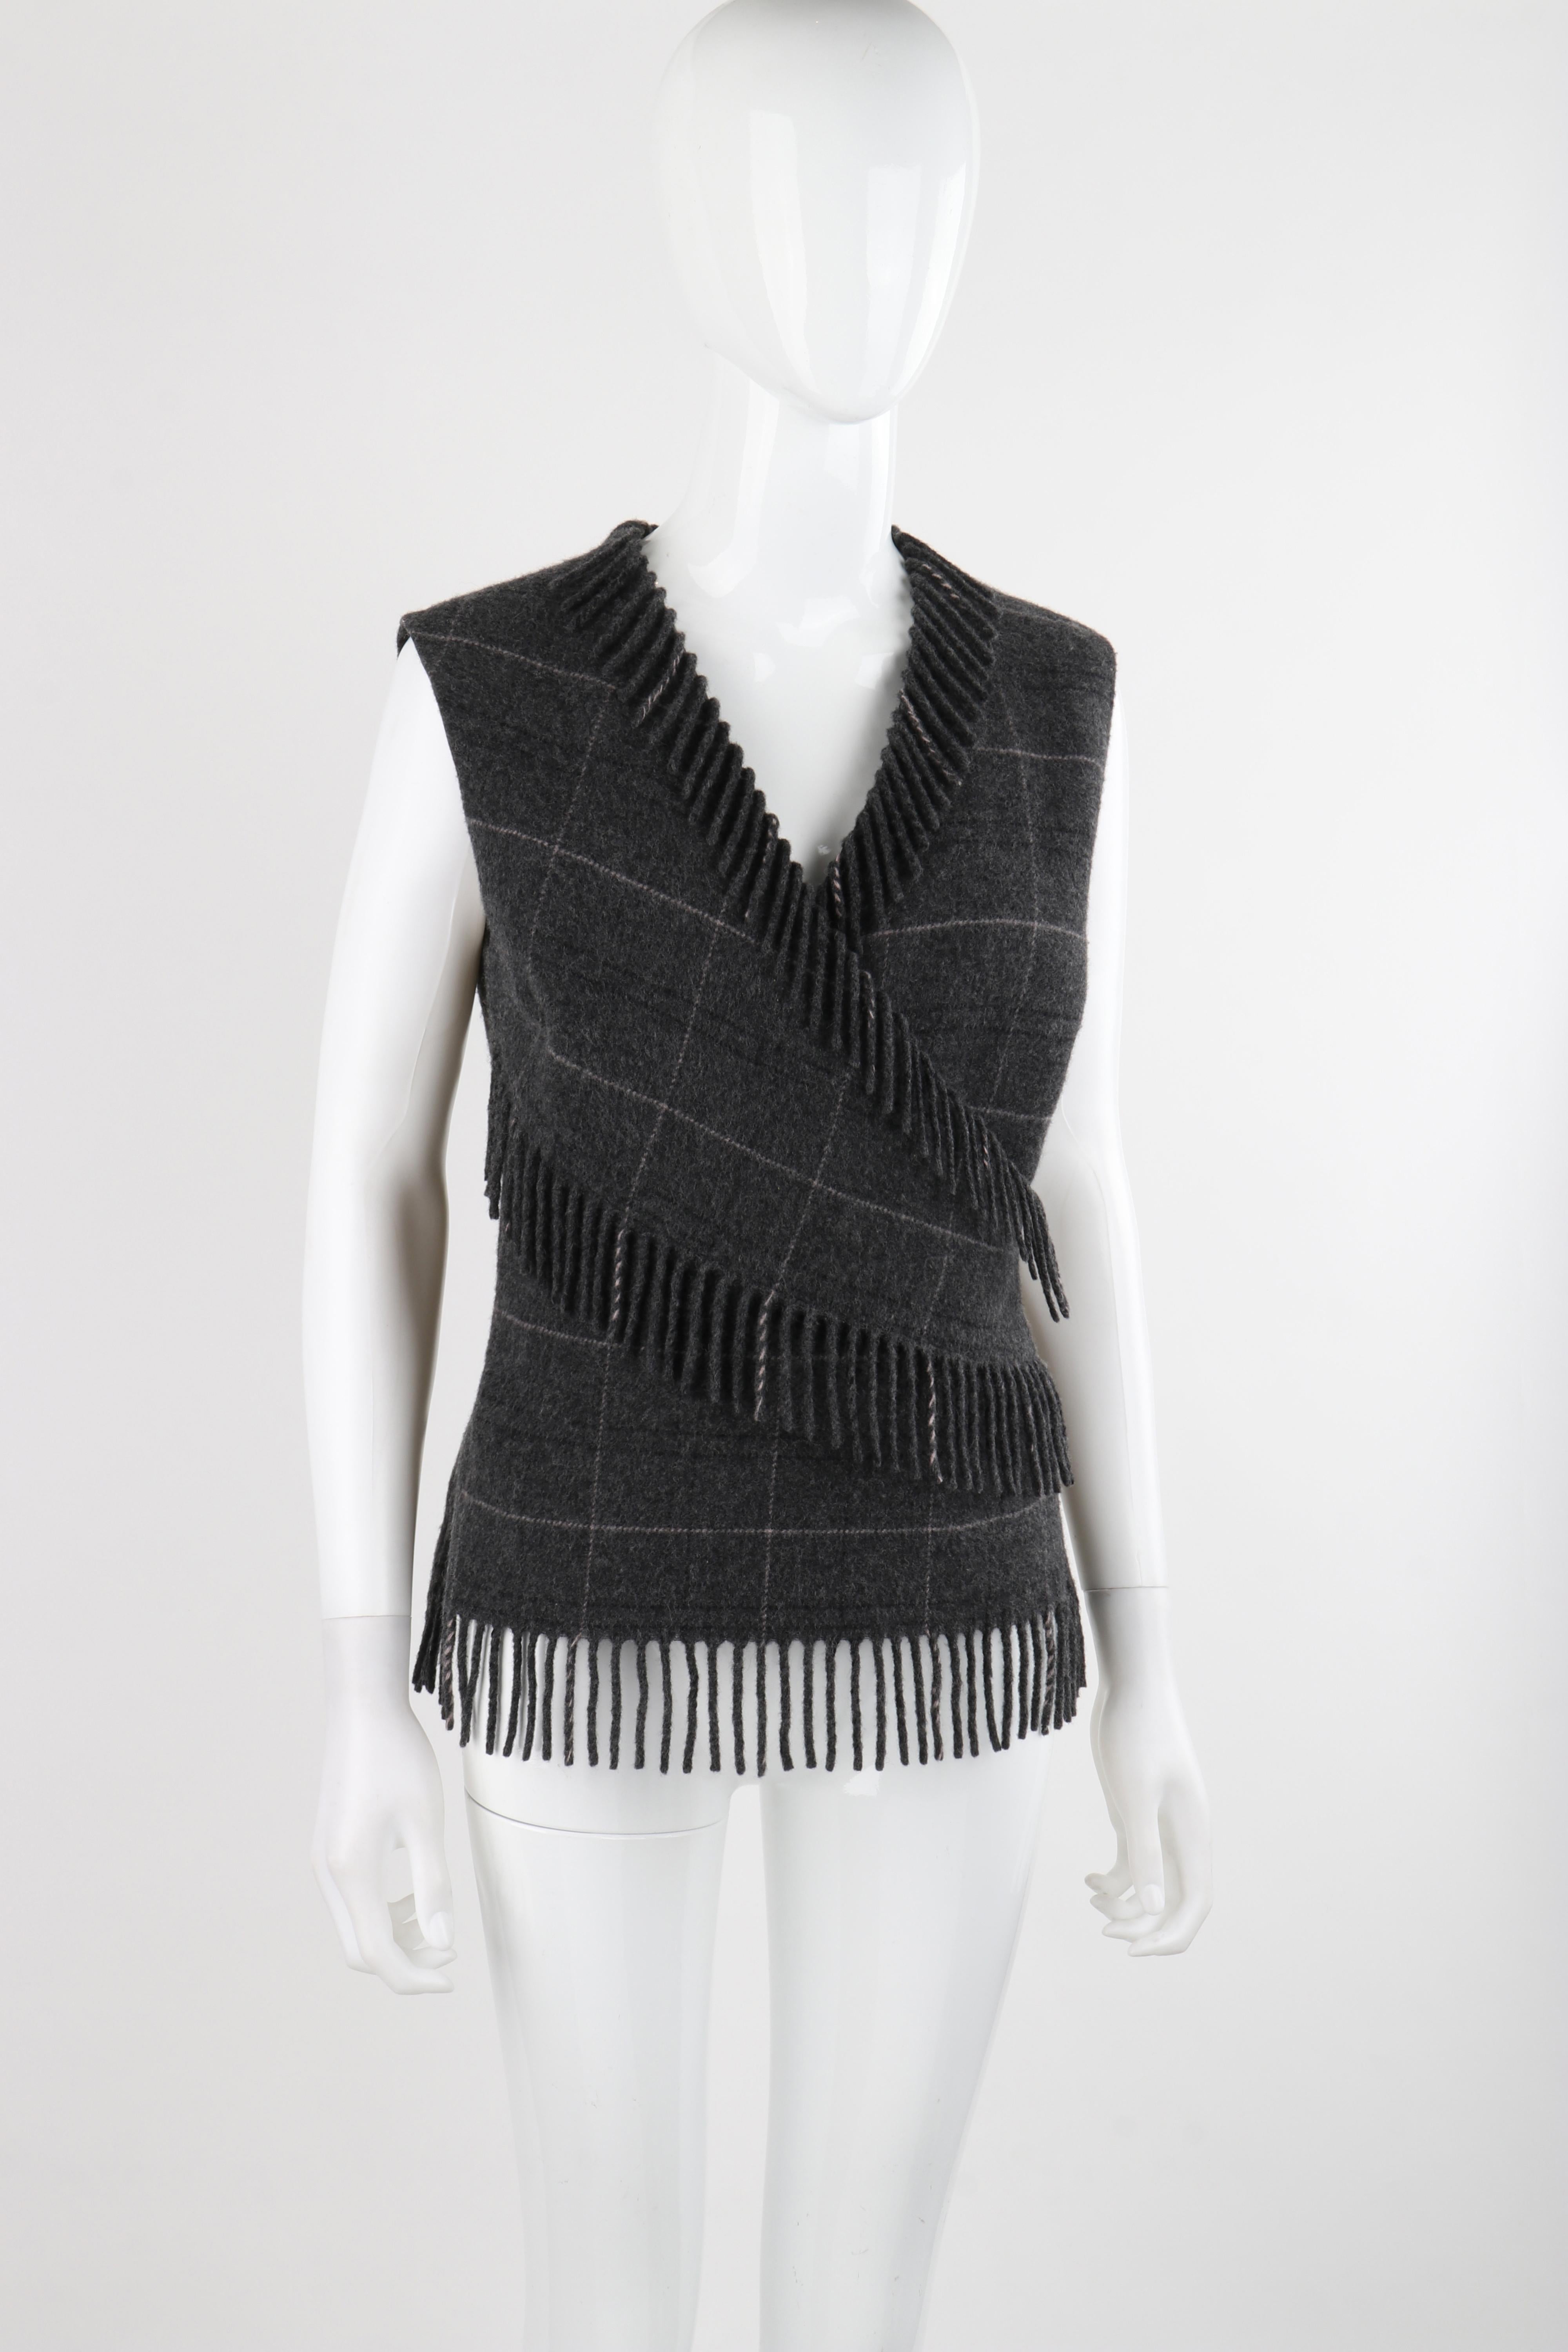 ALEXANDER McQUEEN F/W 1999 Gray Wool Plaid Wrap Fringe Sleeveless Vest Knit Top In Good Condition For Sale In Thiensville, WI